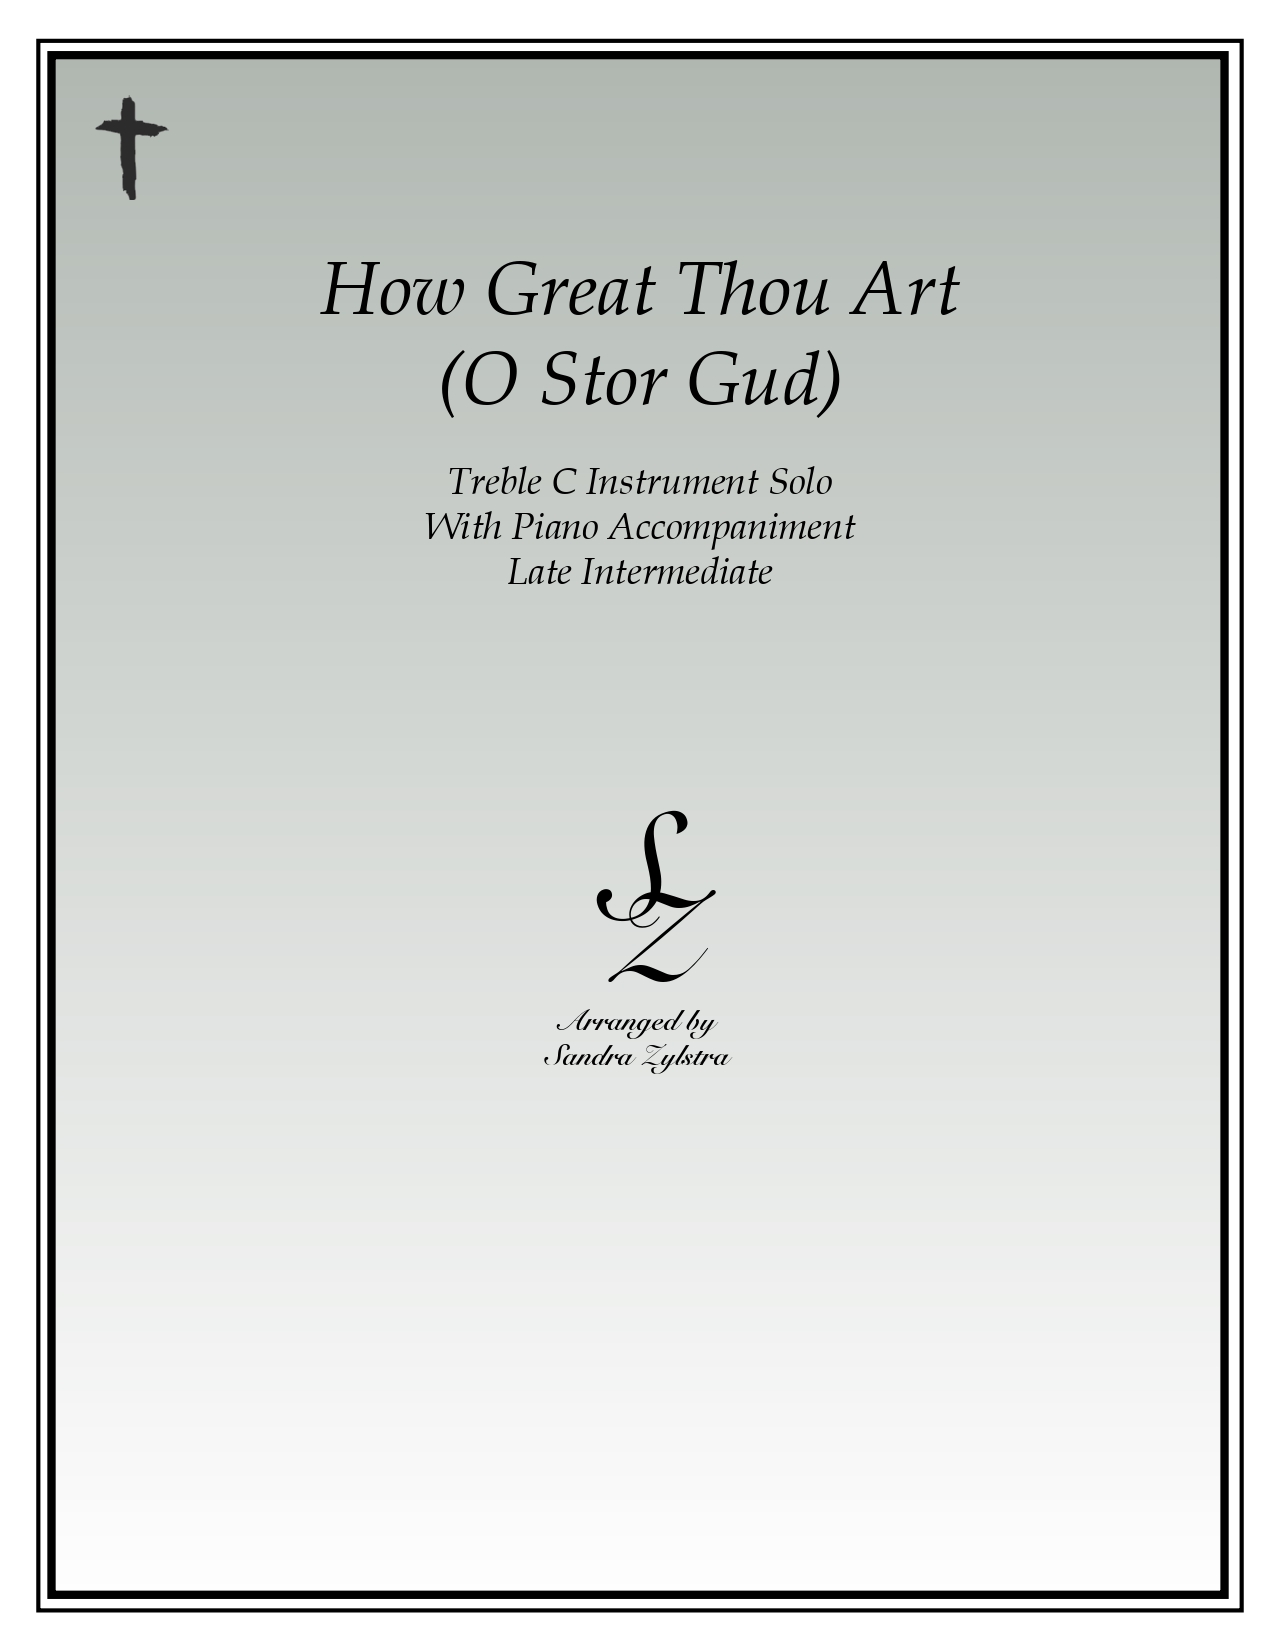 How Great Thou Art treble C instrument solo part cover page 00011